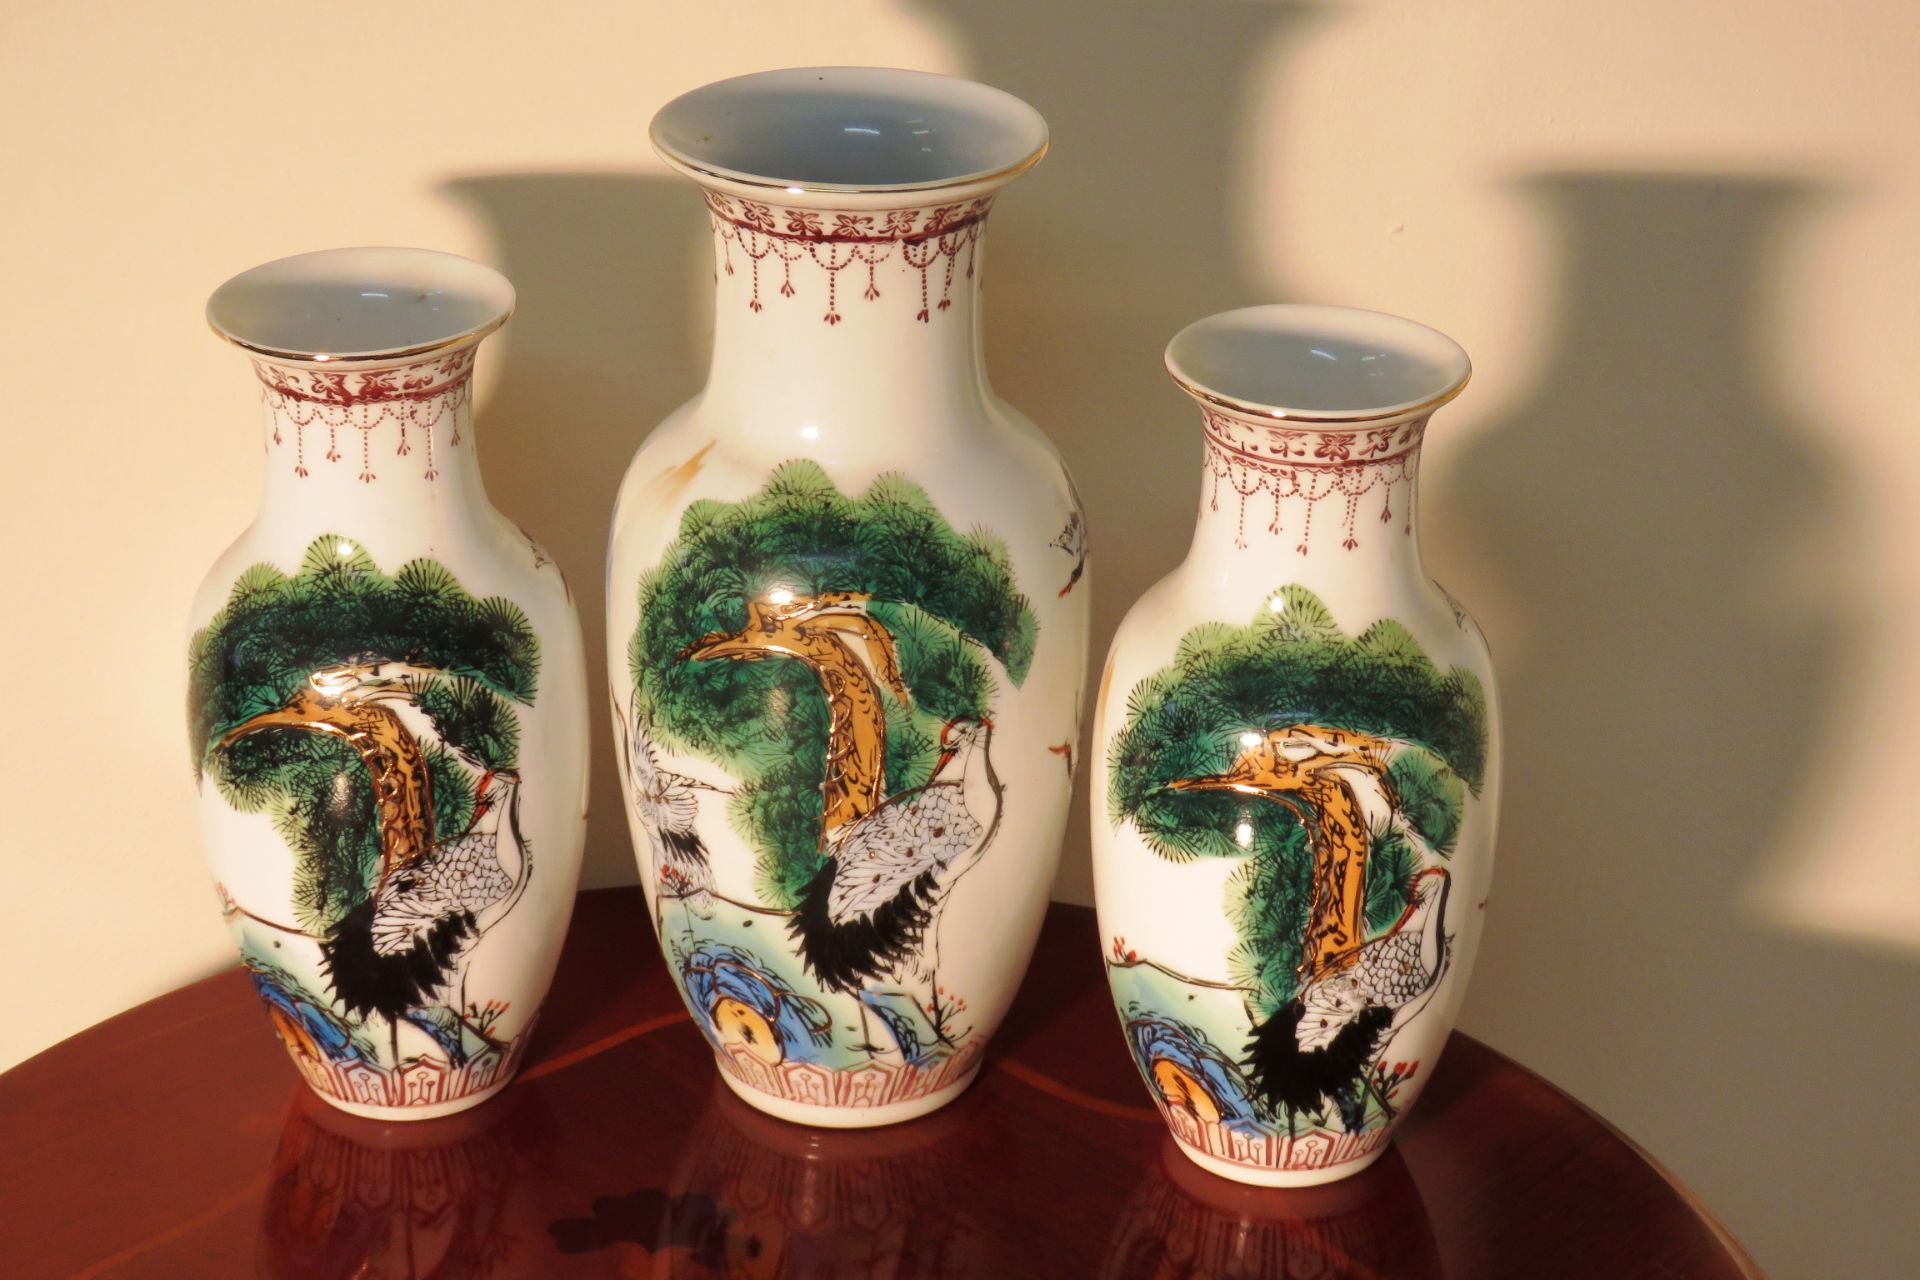 THREE ORIENTAL DECORATIVE PORCELAIN VASES DEPICTING CRANE BIRDS - CHINESE MARKINGS TO THE BASE